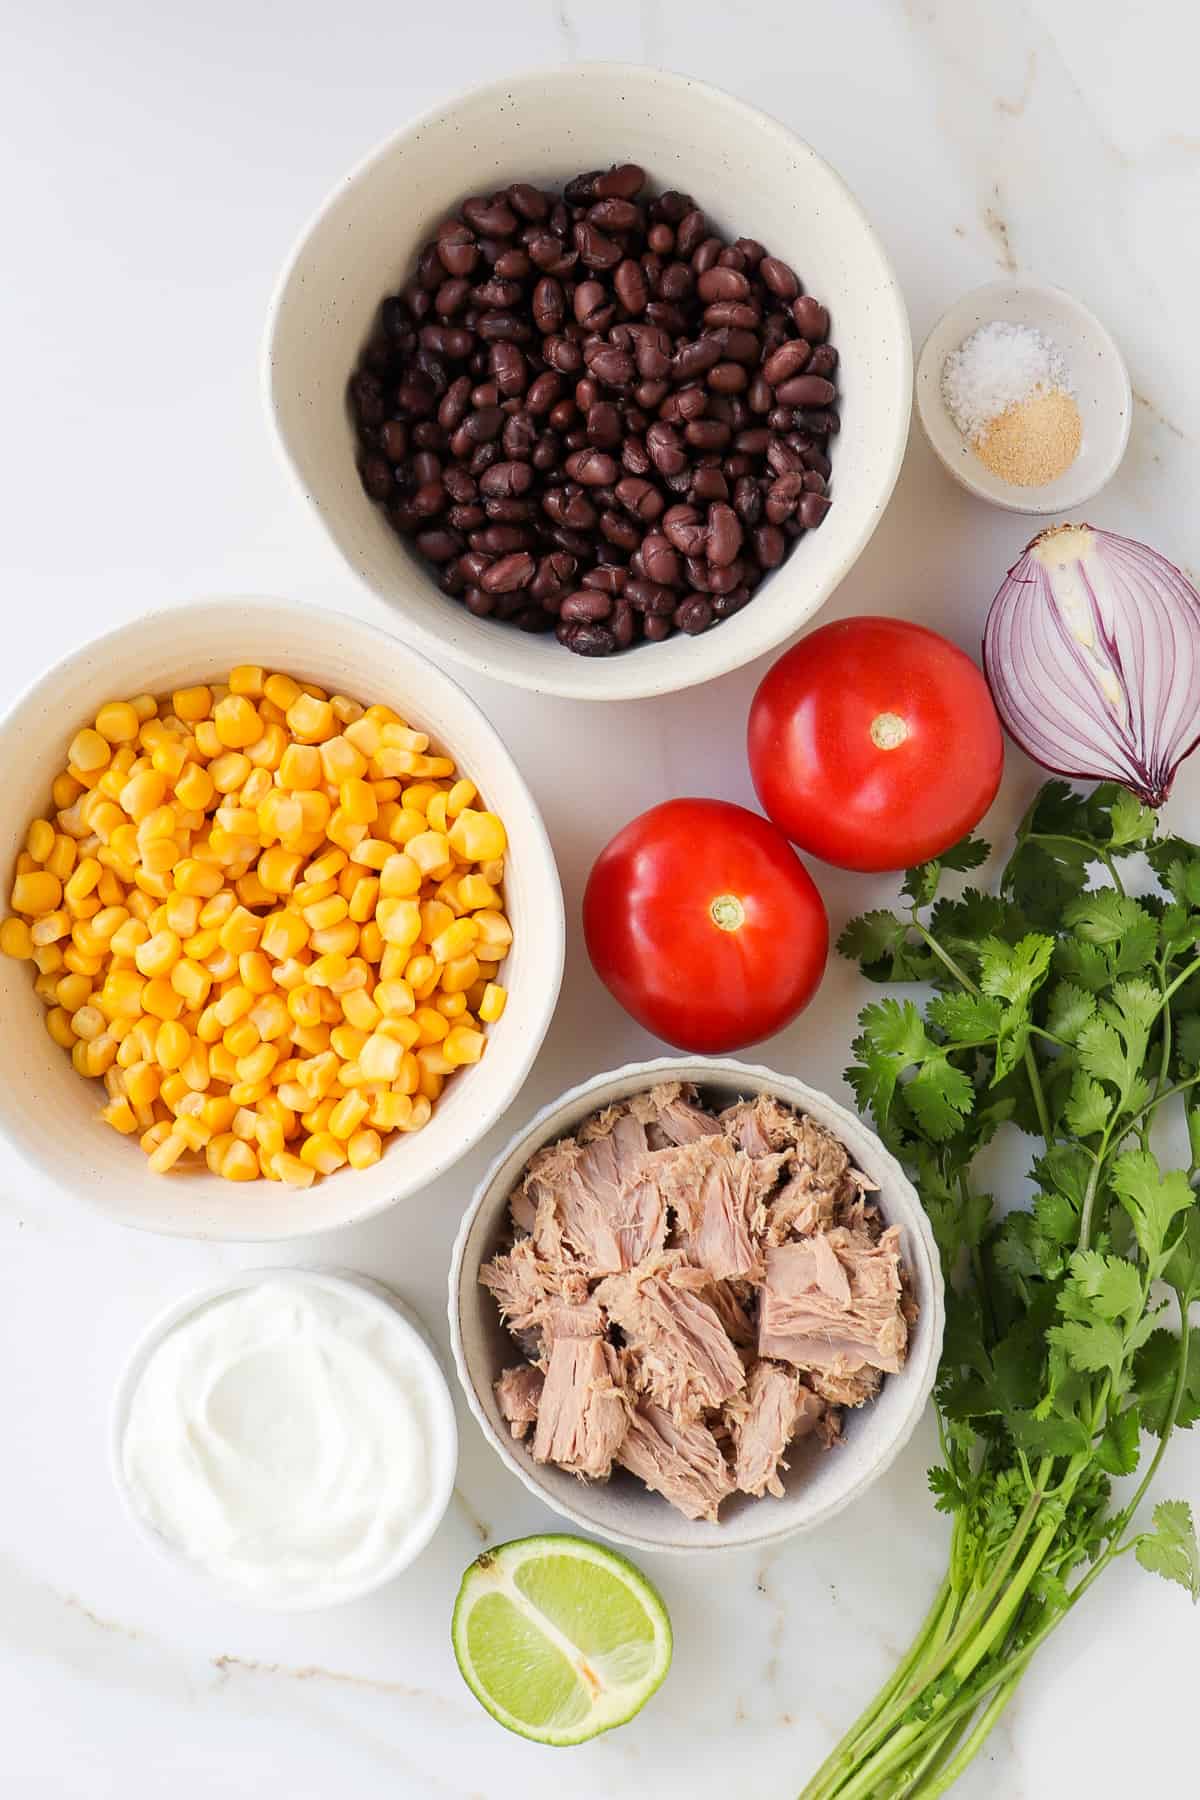 Ingredients shown to make Mexican tuna salad.